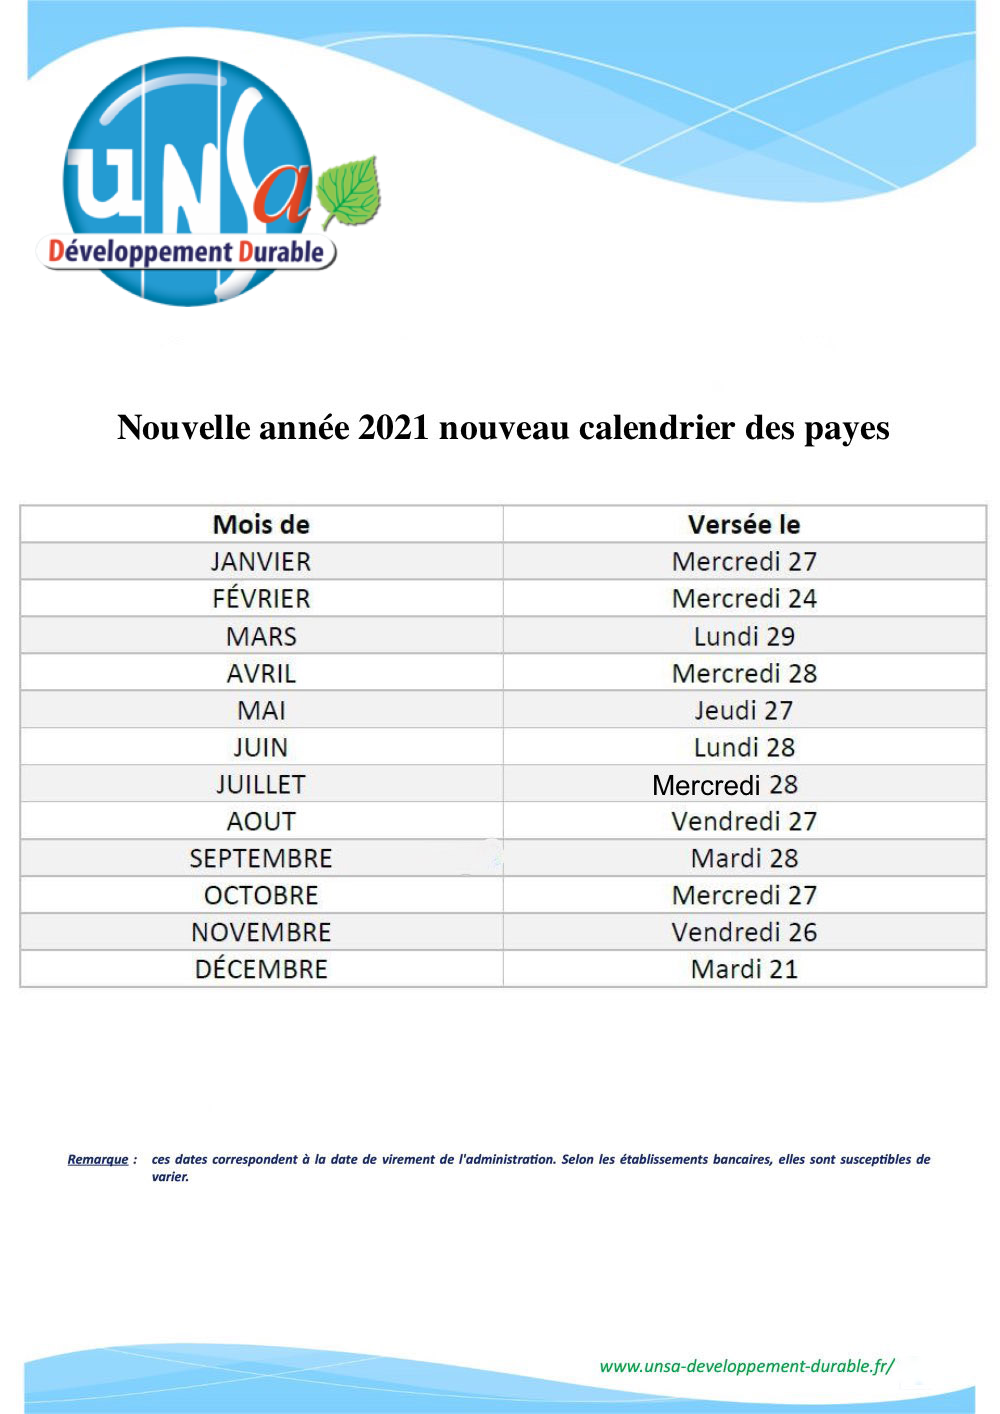 Calendrier des payes 2021 b